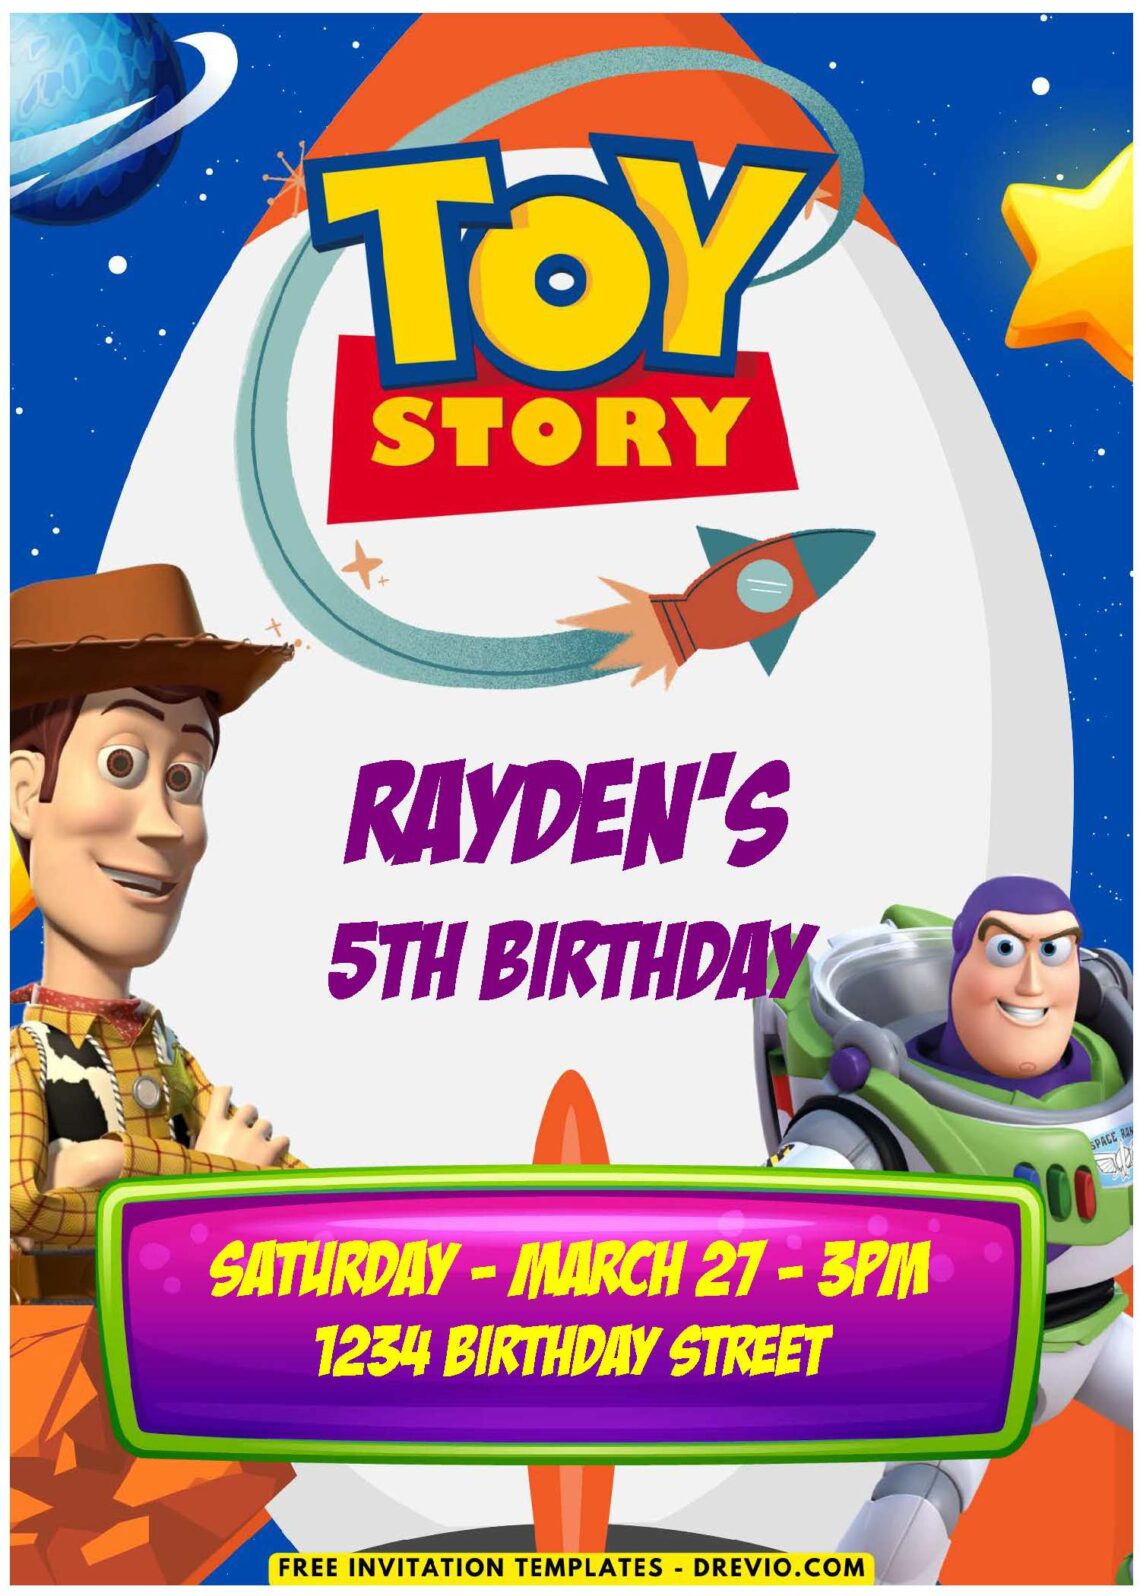 A Complete Toy Story Invitation Template For Fun-Filled Kids Parties E